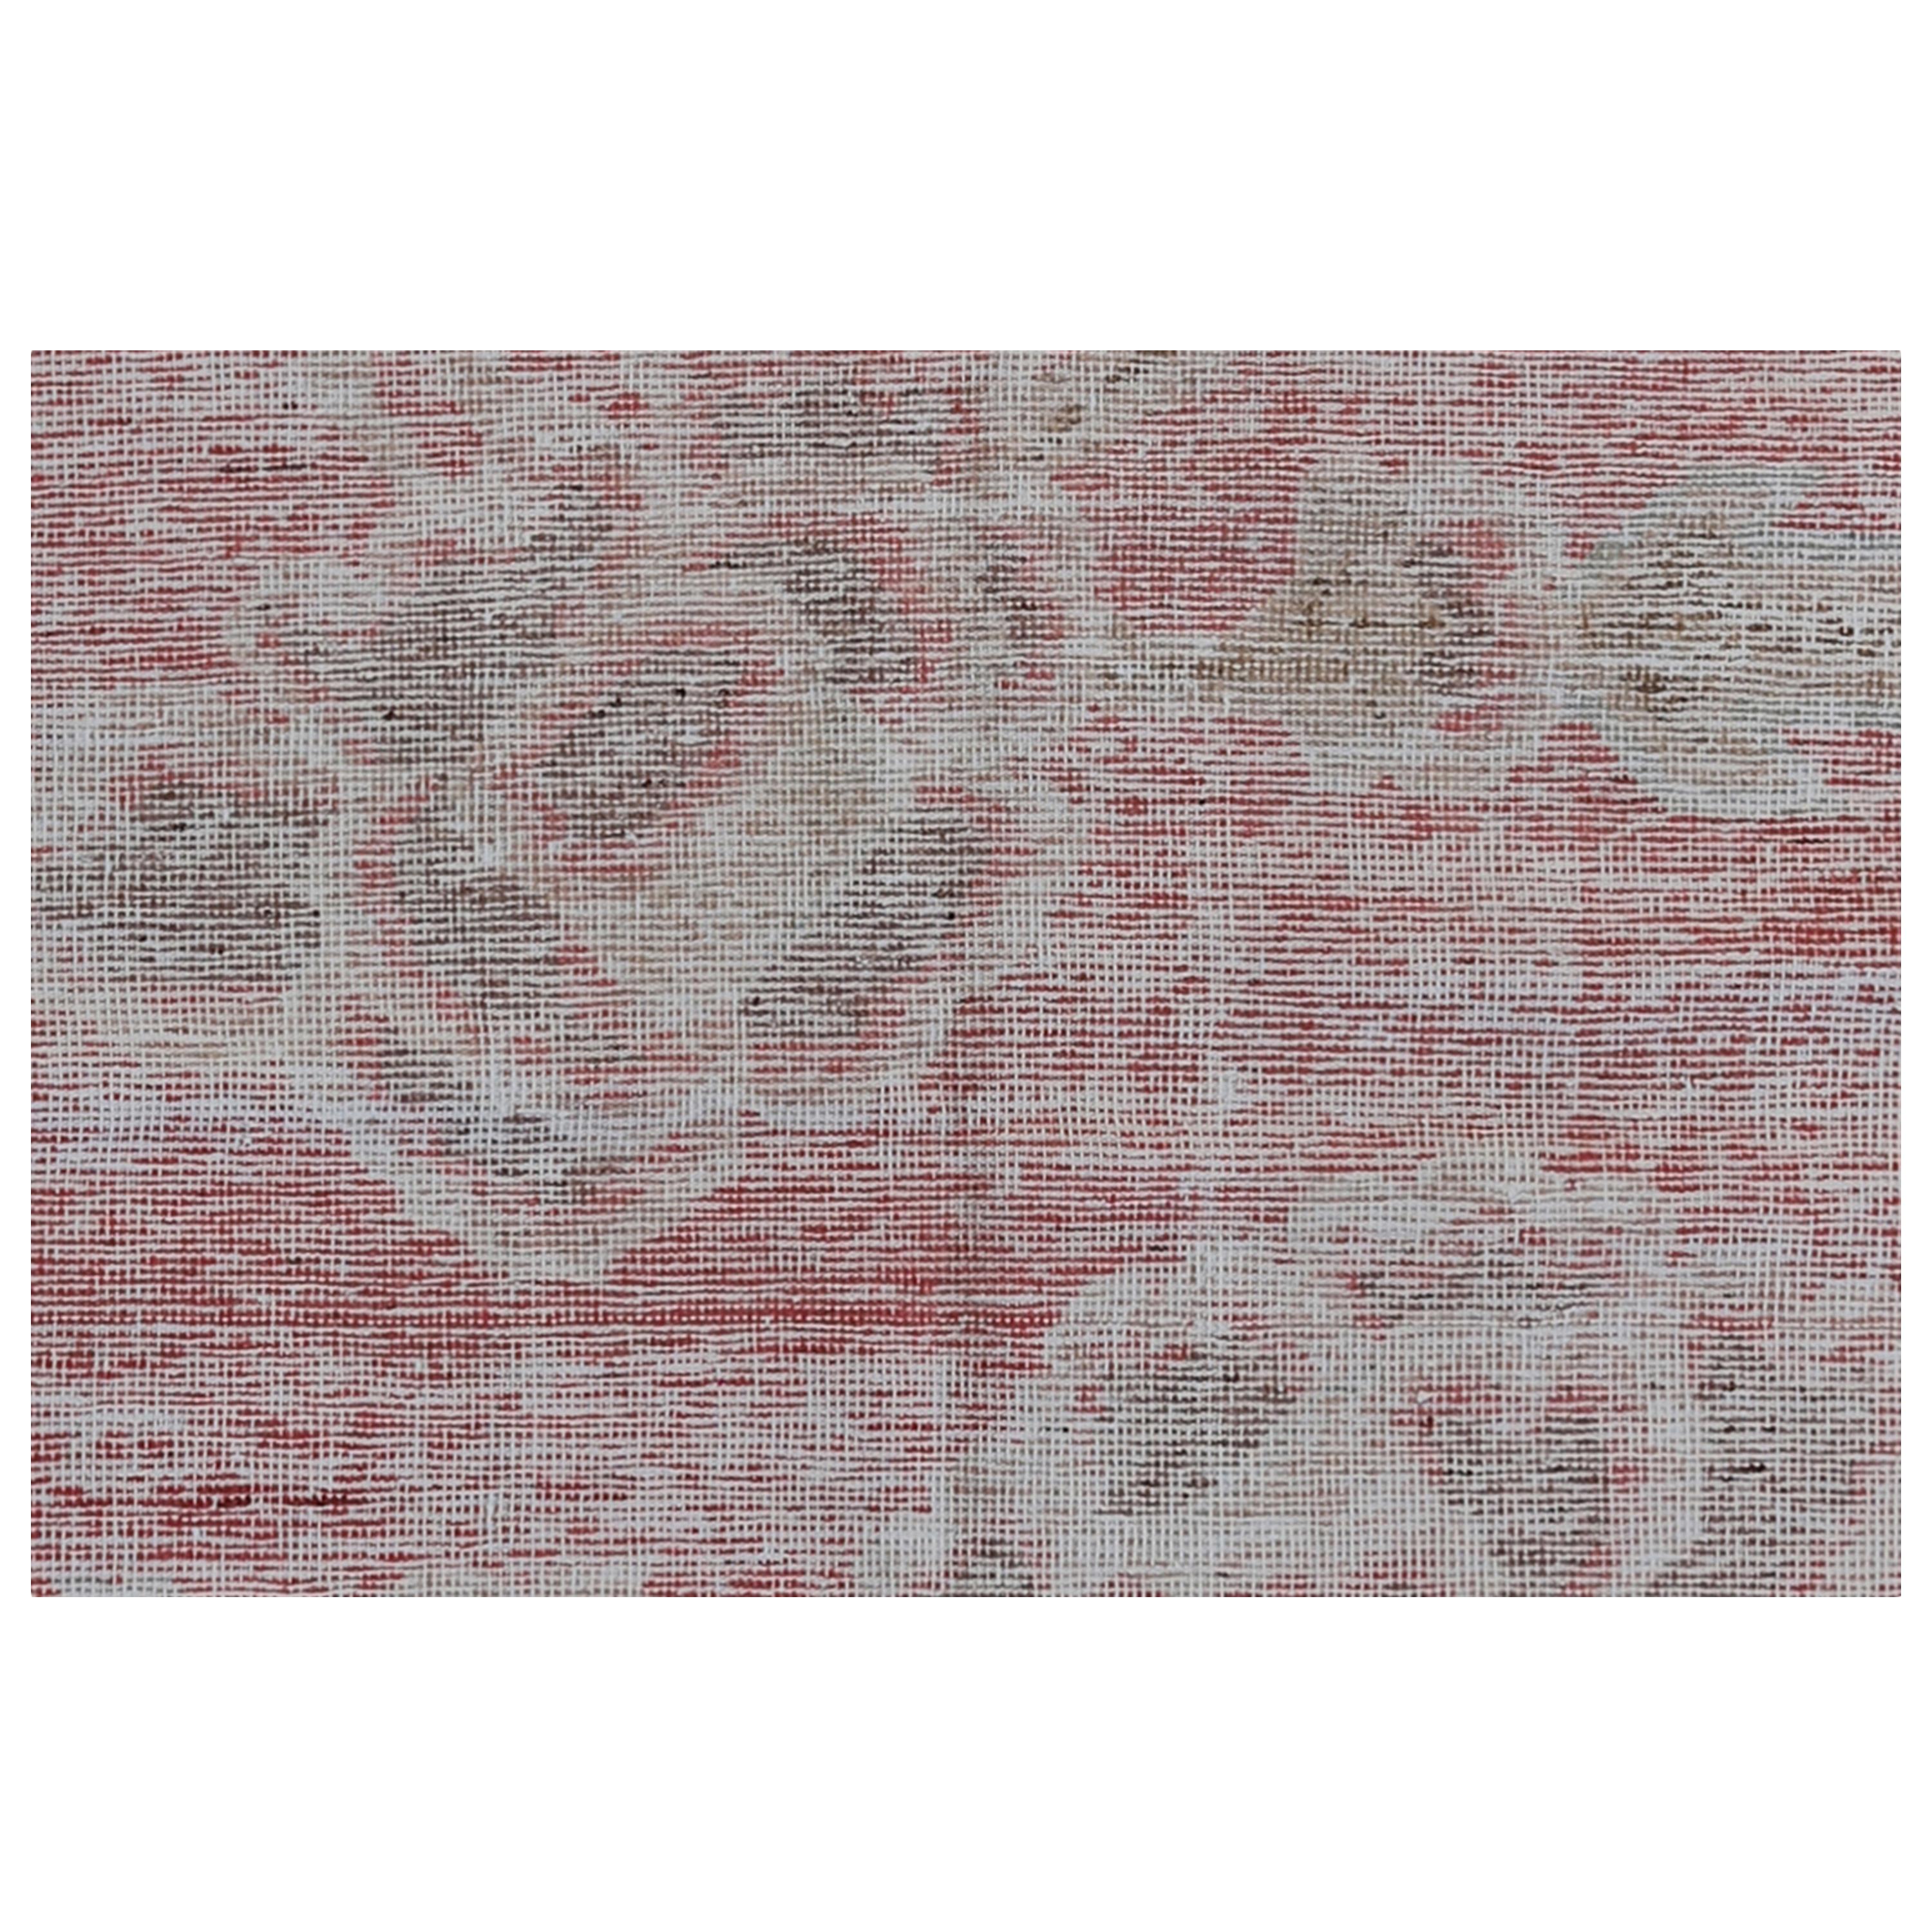 Sourced from the ancient Silk Road to bring a genuine one-of-a-kind rug to your home, this Pink and Grey Vintage Wool Cotton Blend Rug - 4'10